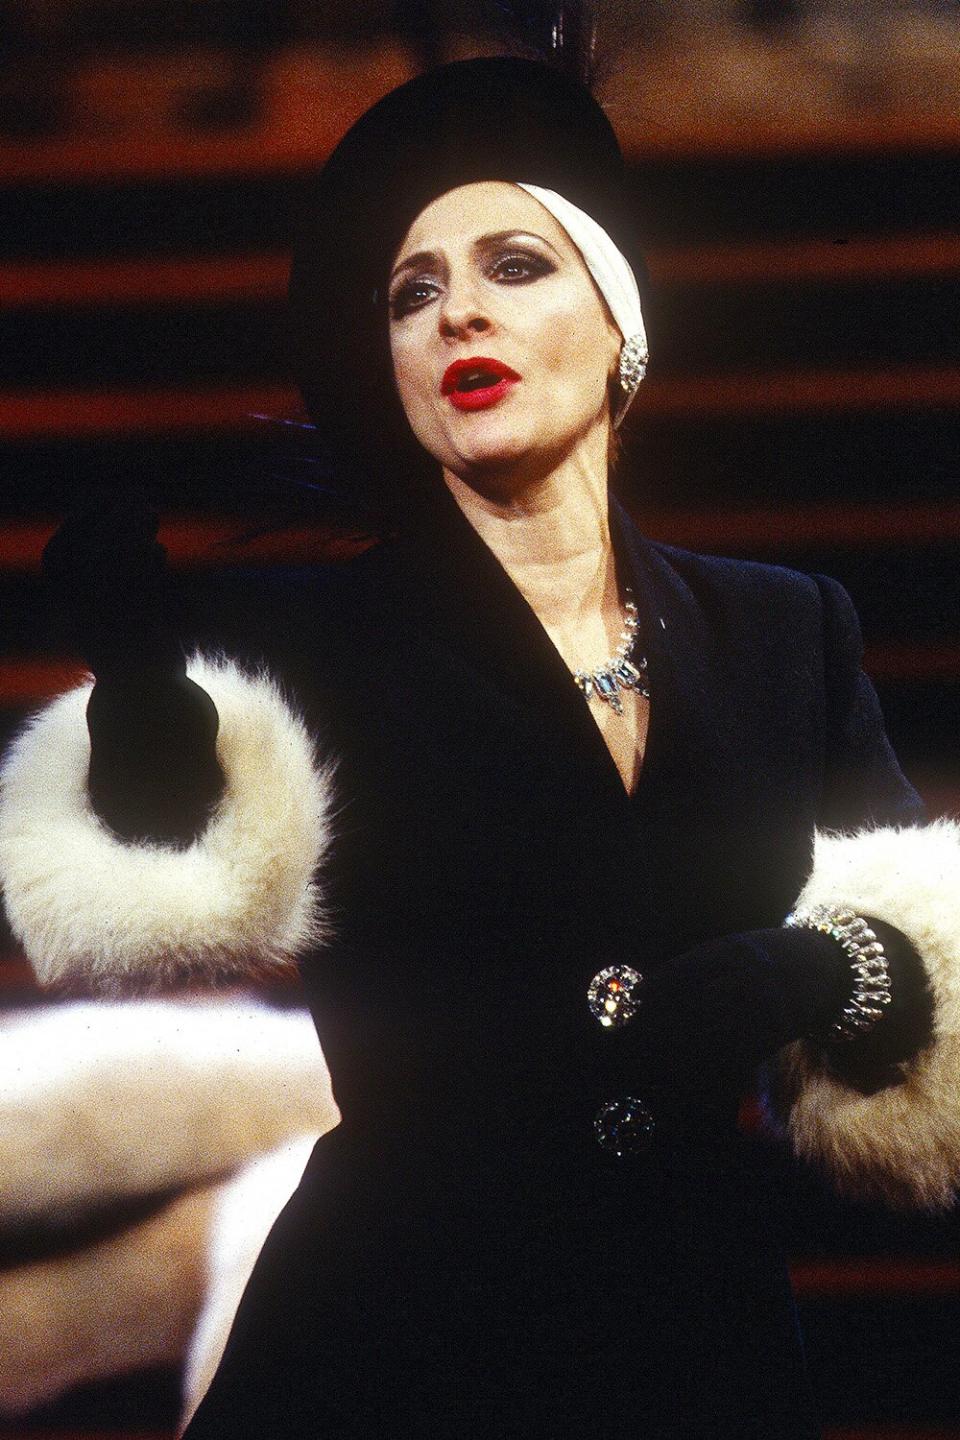 Editorial use only Mandatory Credit: Photo by Alastair Muir/Shutterstock (10646363b) Patti Lupone 'Sunset Boulevard' Musical performed in the Adelphi Theatre, London, UK 1993 - 15 Jun 1993